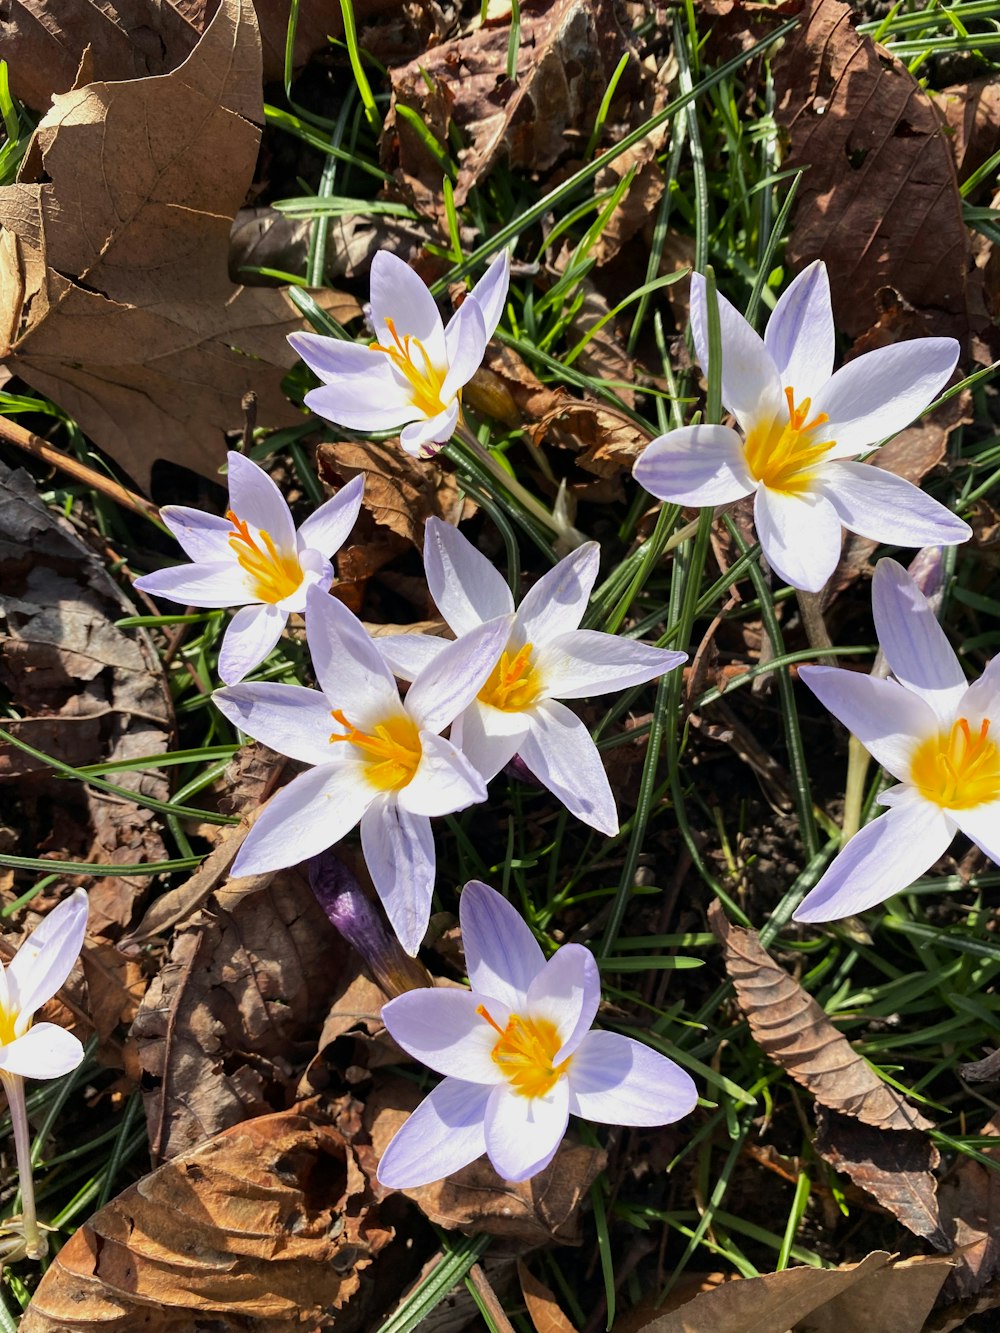 a group of white and yellow flowers on the ground